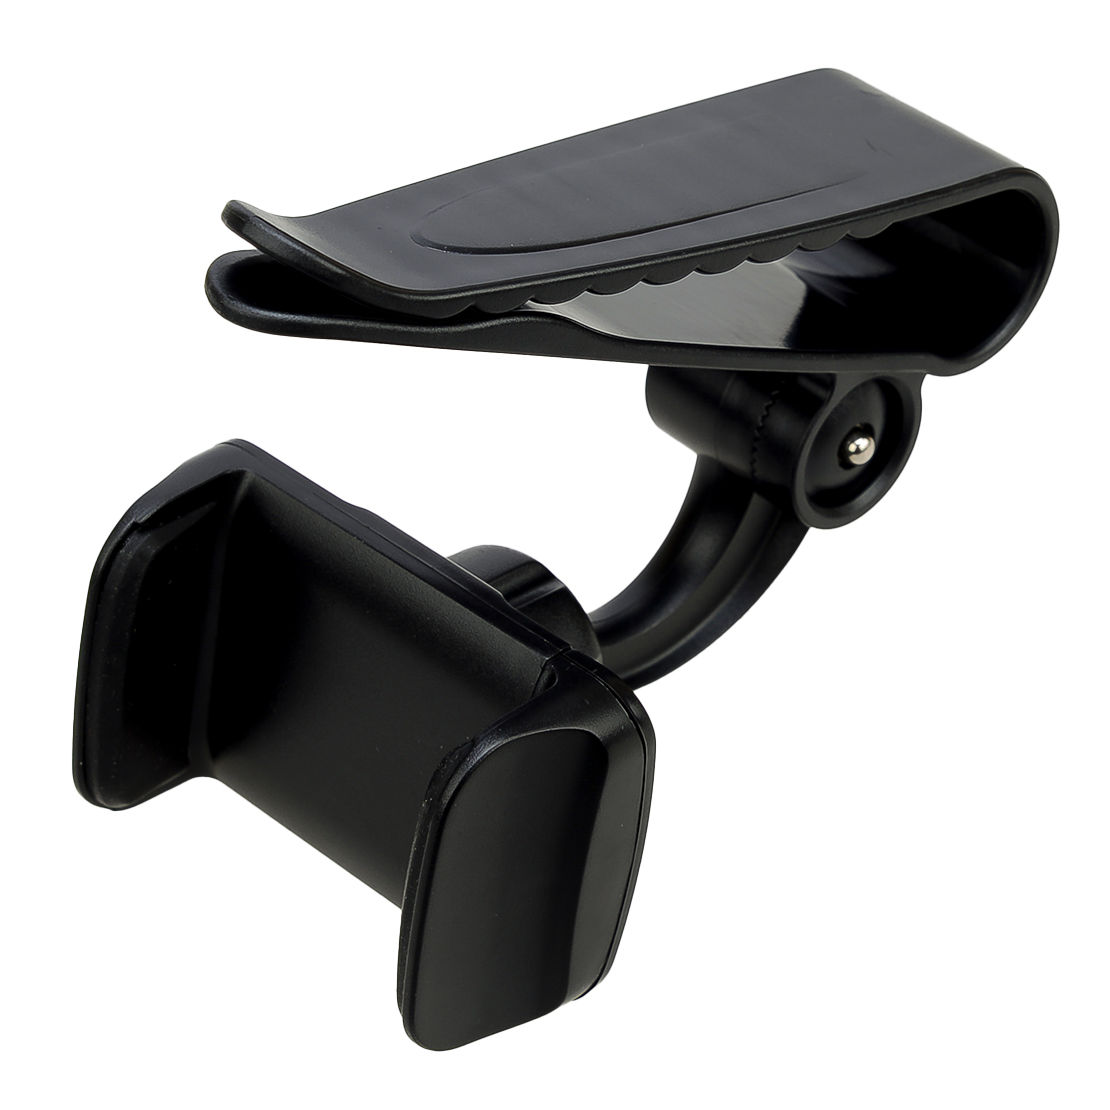 360 Car Sun Visor Mirror Mount Cradle Holder Stand For Mobile Cell Phone GPS A9